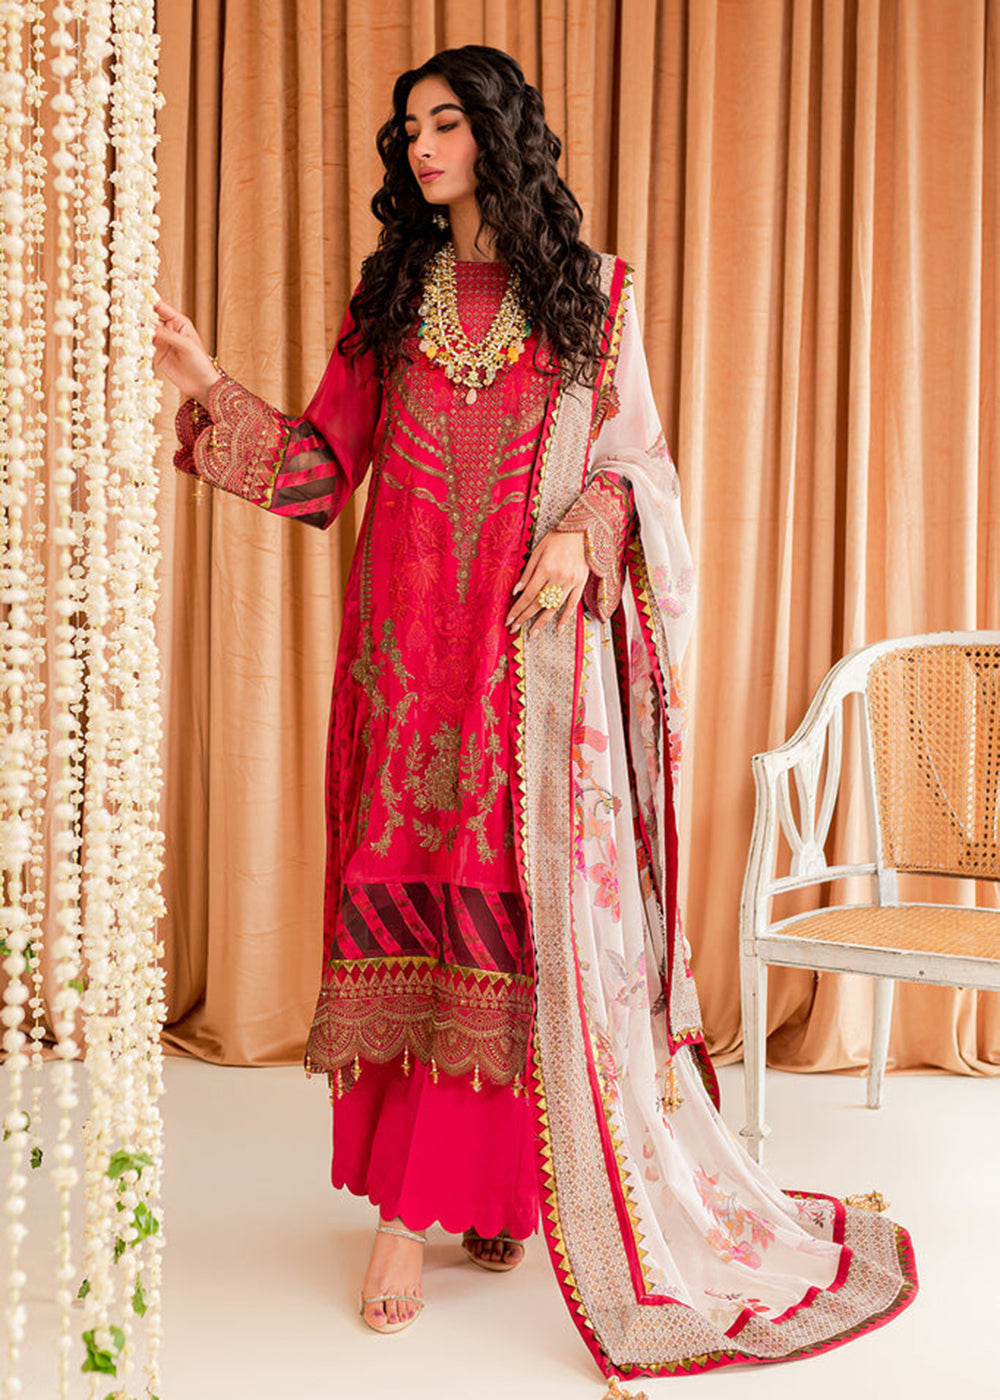 Buy Now Red Chiffon Suit - Vasal Formals ’23 By Charizma | VSL-03 Online in USA, UK, Canada & Worldwide at Empress Clothing.